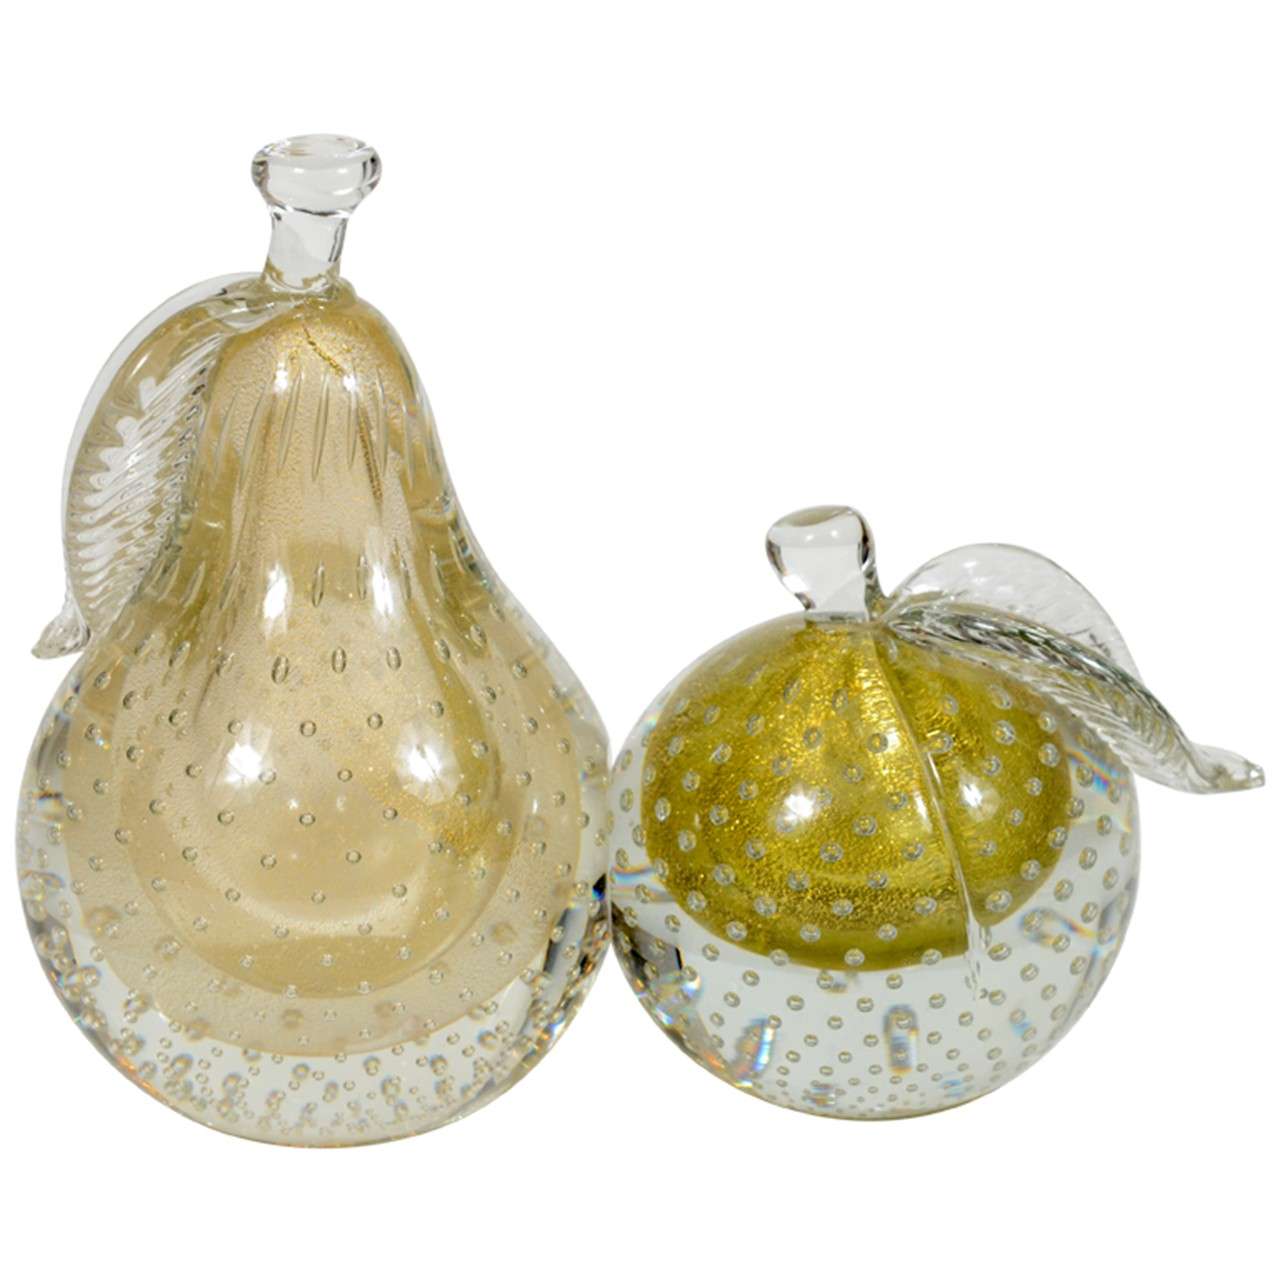 Gorgeous set of Hand Blown Murano Glass Pear and Apple by Barbini